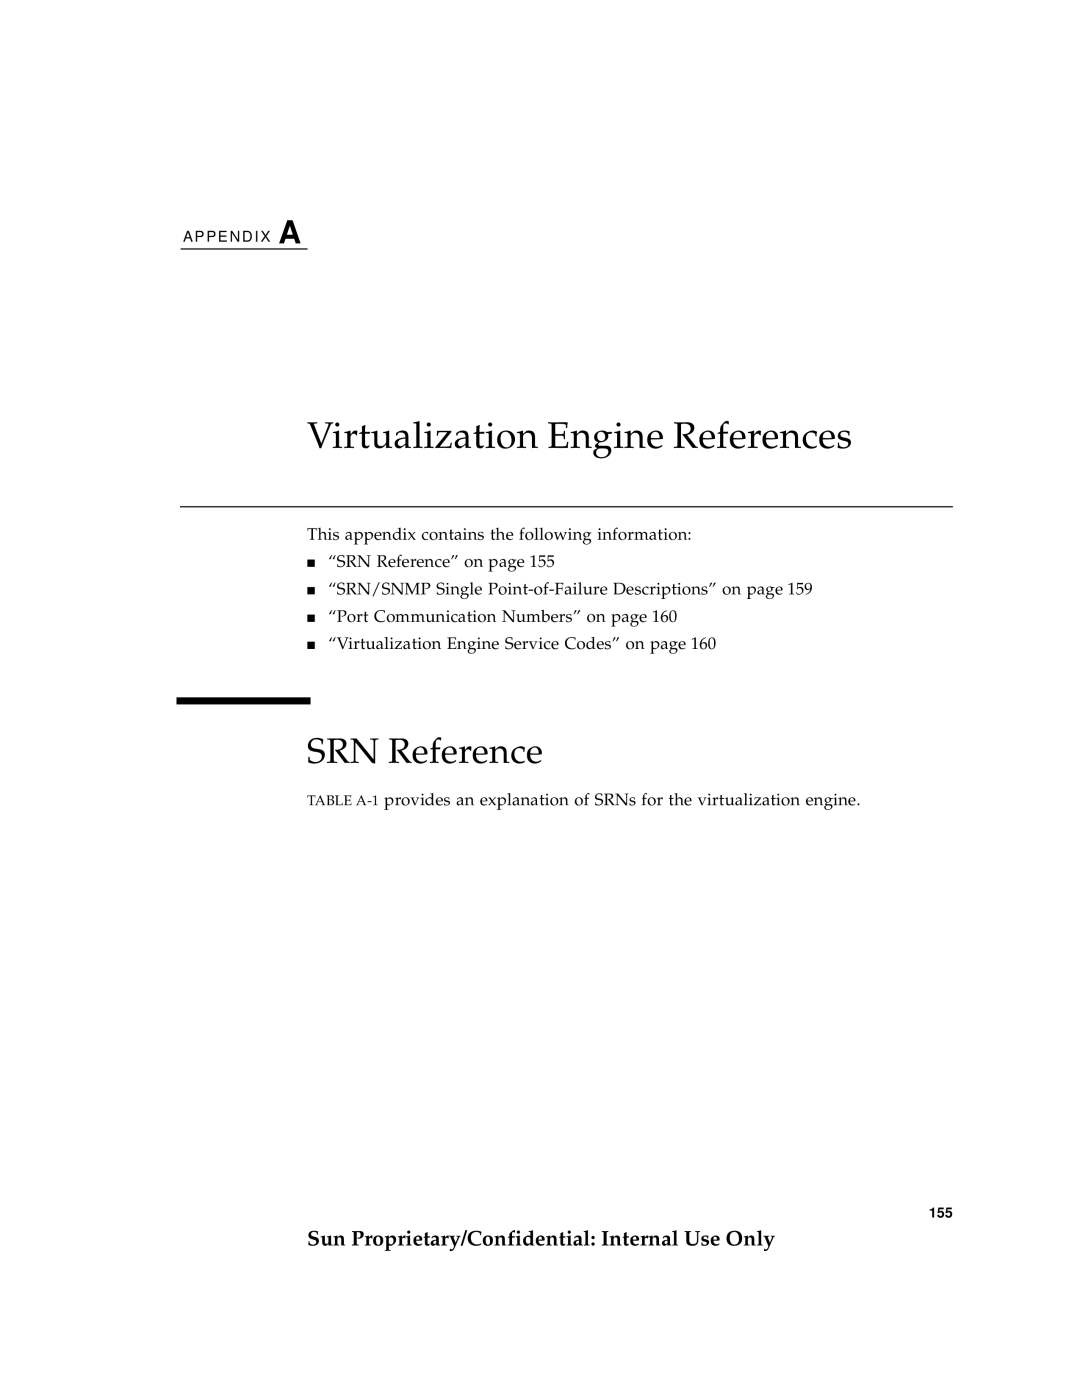 Sun Microsystems 6900 Virtualization Engine References, SRN Reference, Sun Proprietary/Confidential Internal Use Only 